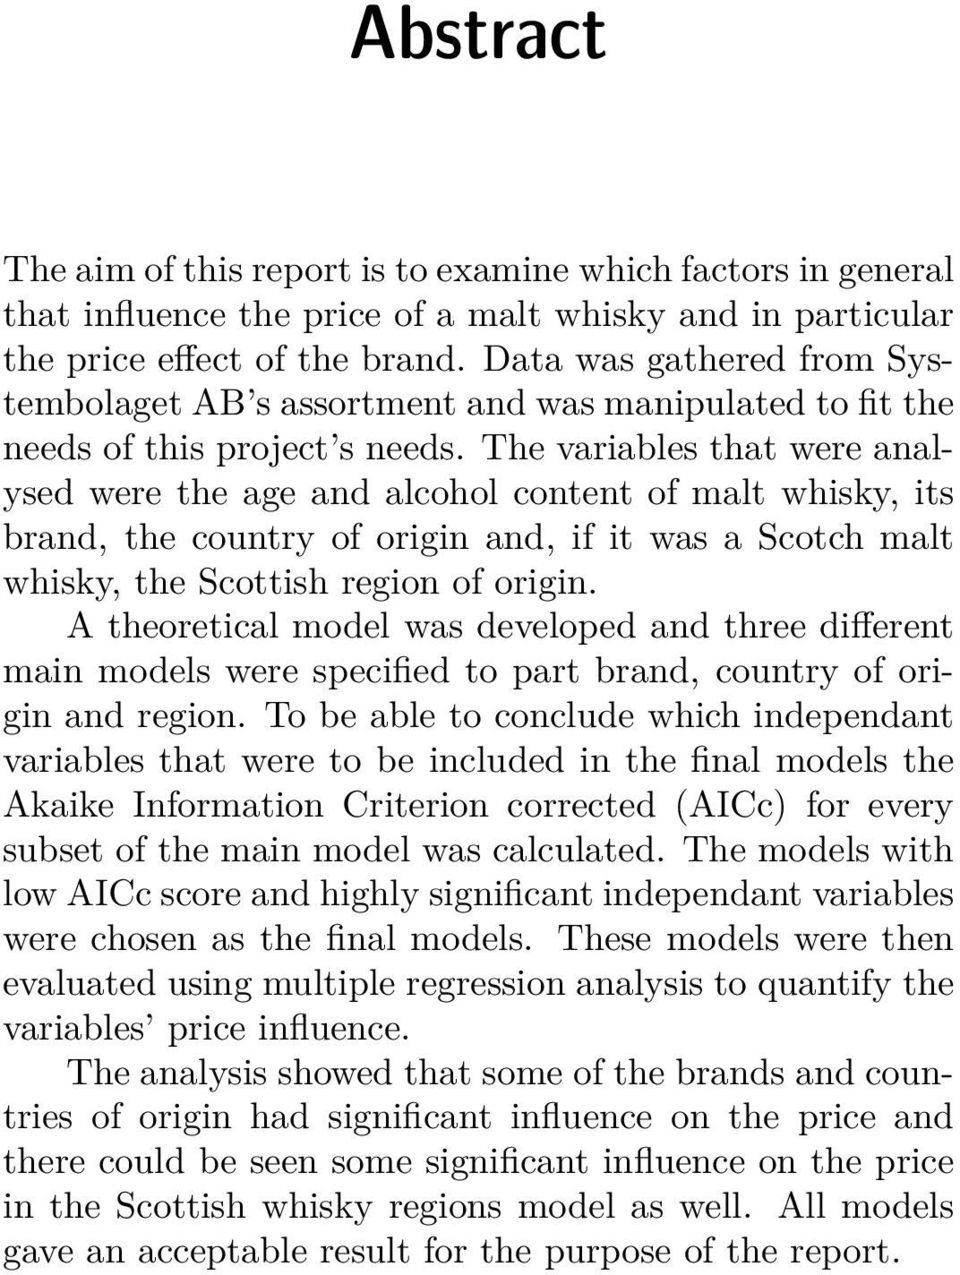 The variables that were analysed were the age and alcohol content of malt whisky, its brand, the country of origin and, if it was a Scotch malt whisky, the Scottish region of origin.